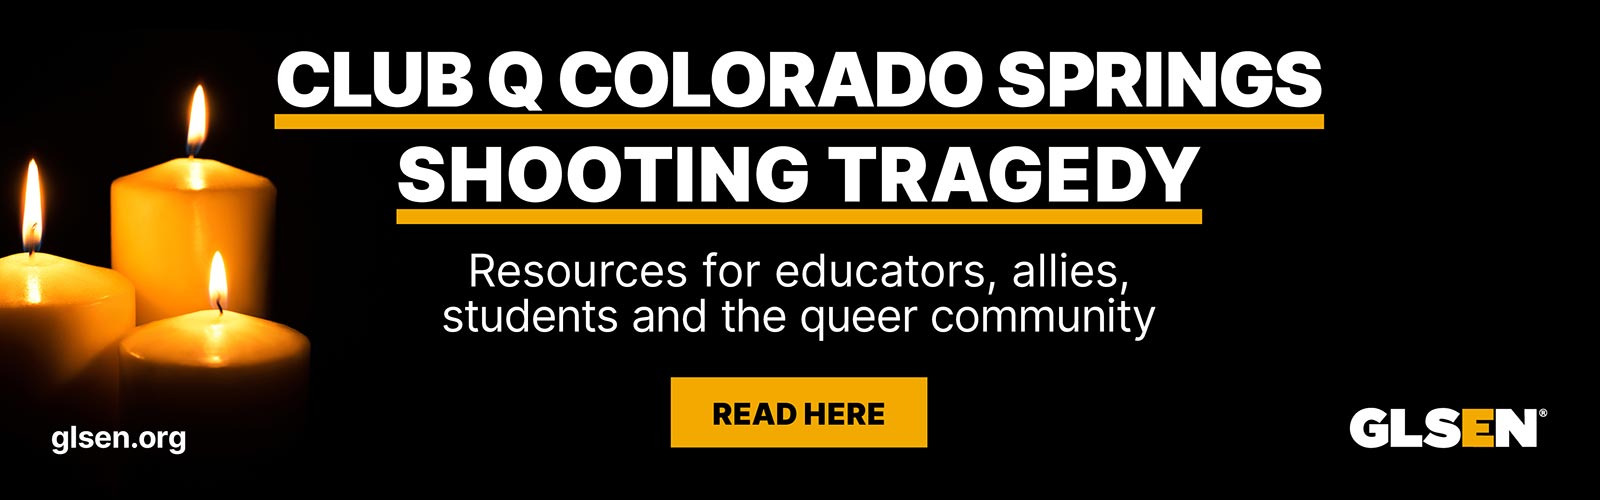 Club Q Colorado Springs Shooting Tragedy: Click here for resources